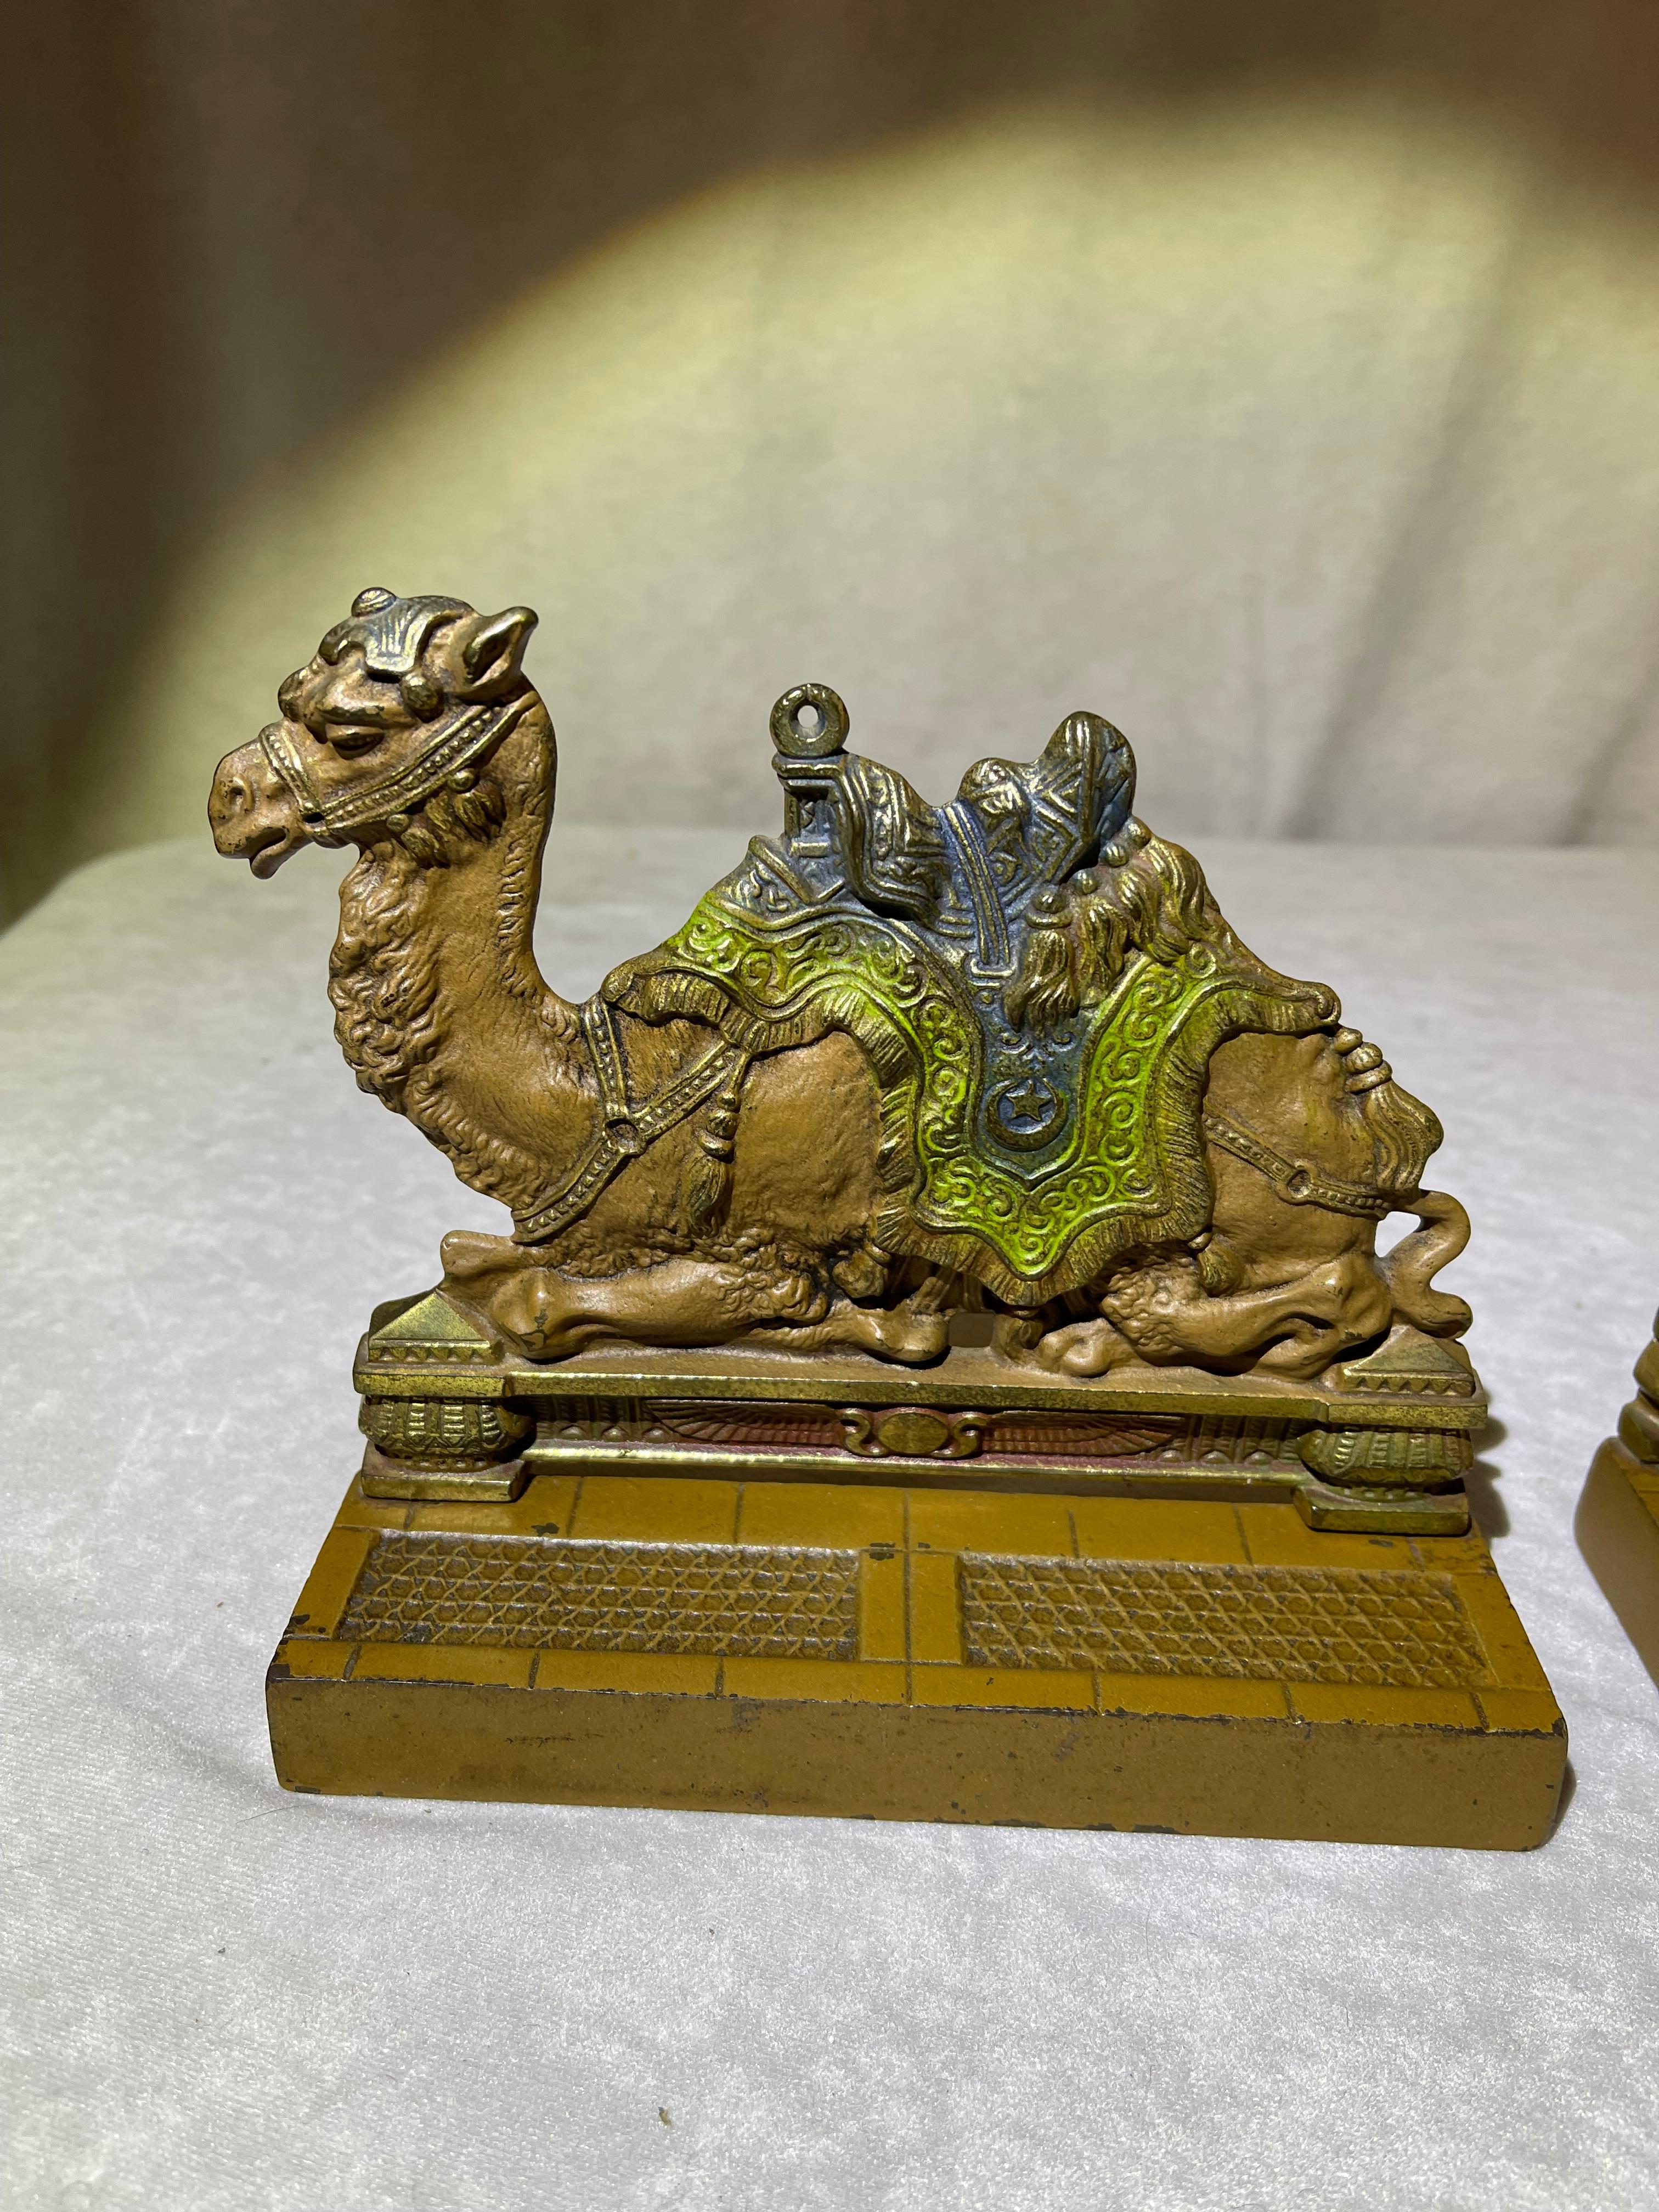 This incredible pair of cast iron bookends can only be made by the Judd Company. Superb detailed castings, realistic factory paint and fine work all around are all present here. These are pictured in the original Judd Company catalog. These are very